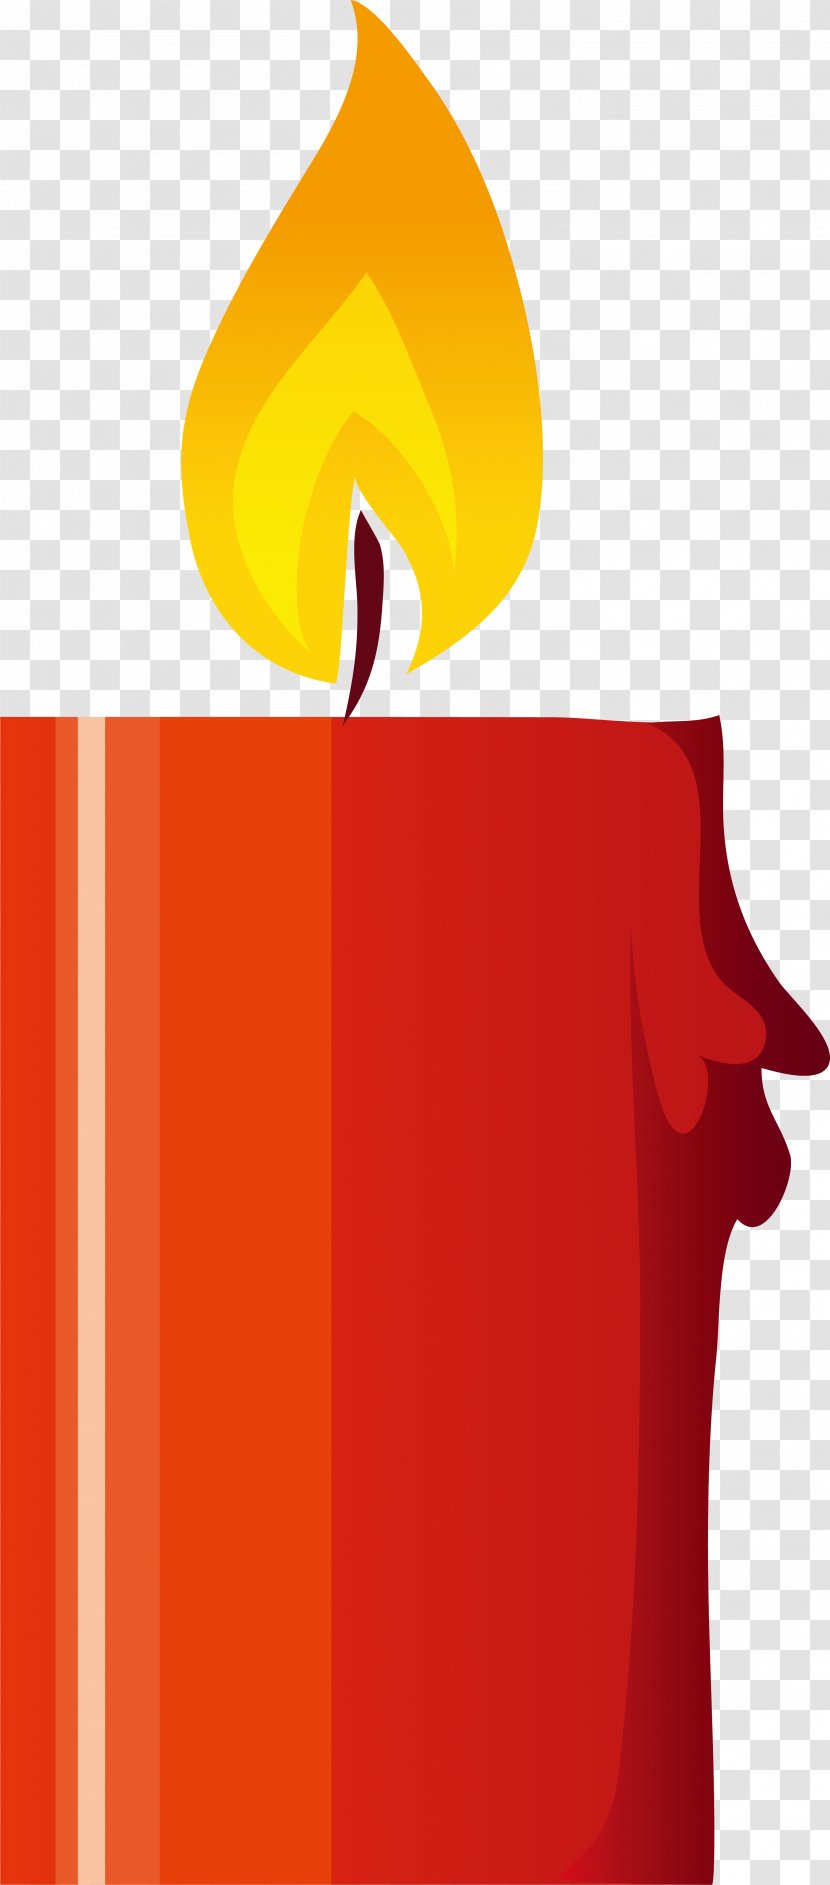 Yellow Illustration - Flame - Little Fresh Red Candle Transparent PNG